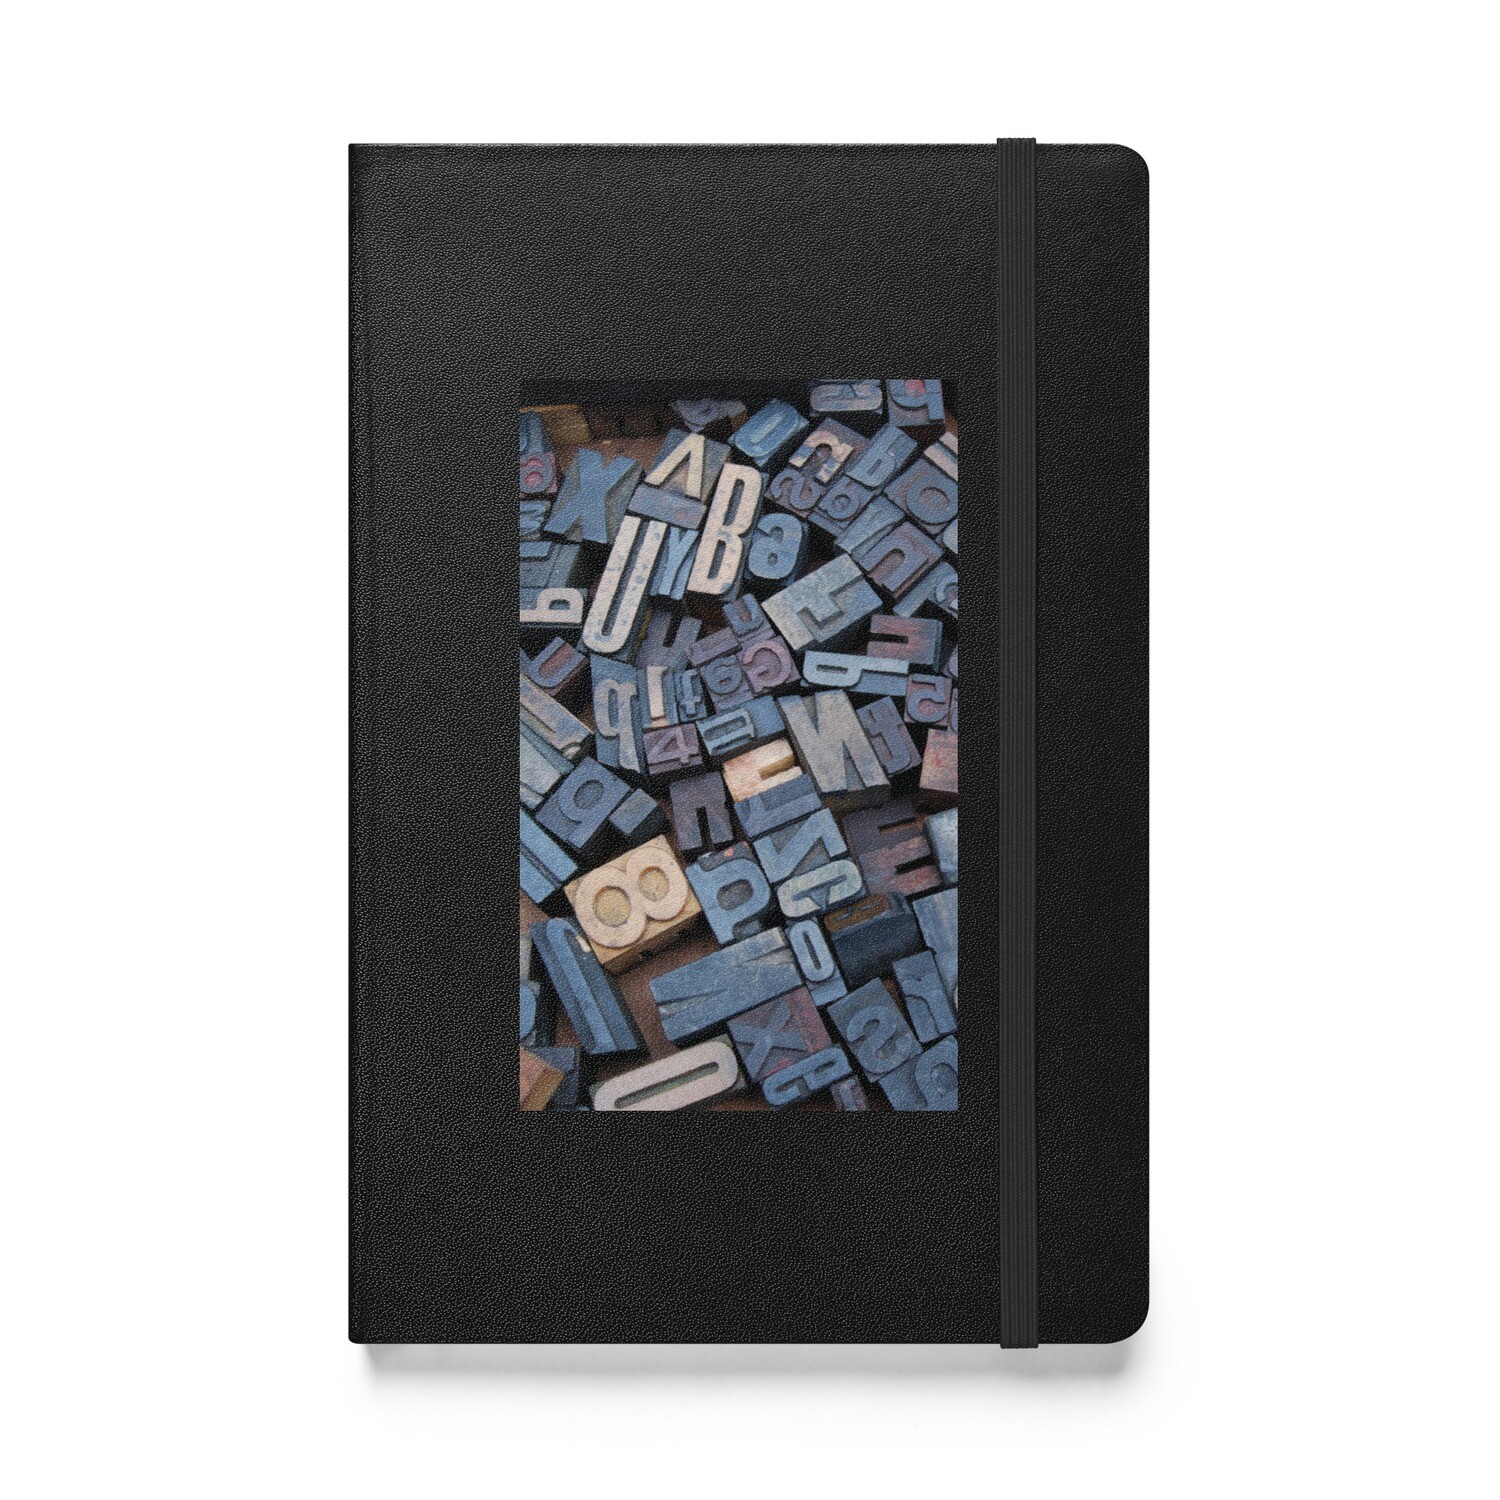 Typesetters Hardcover bound notebook